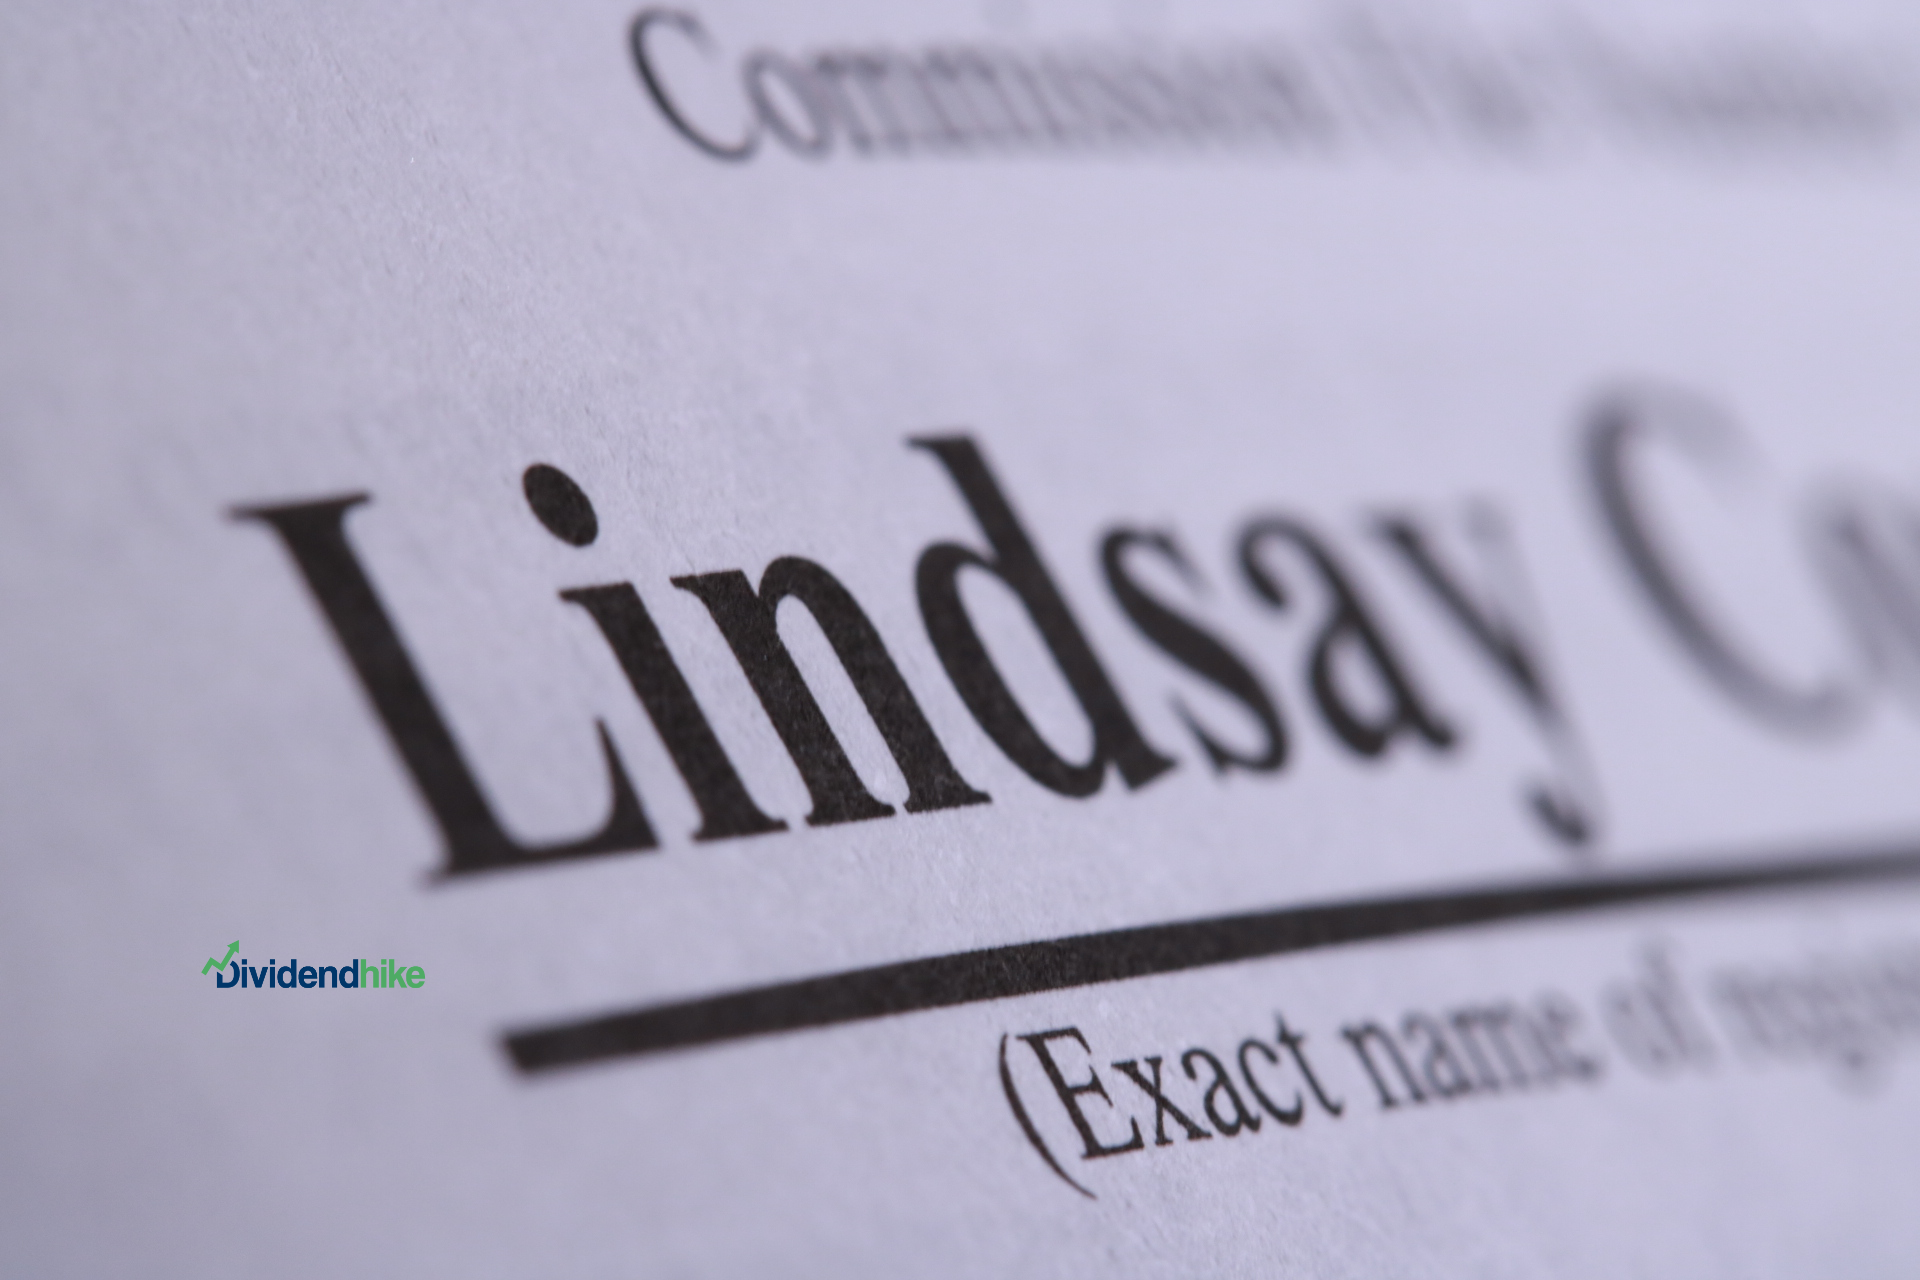 Lindsay hikes dividend by 100%